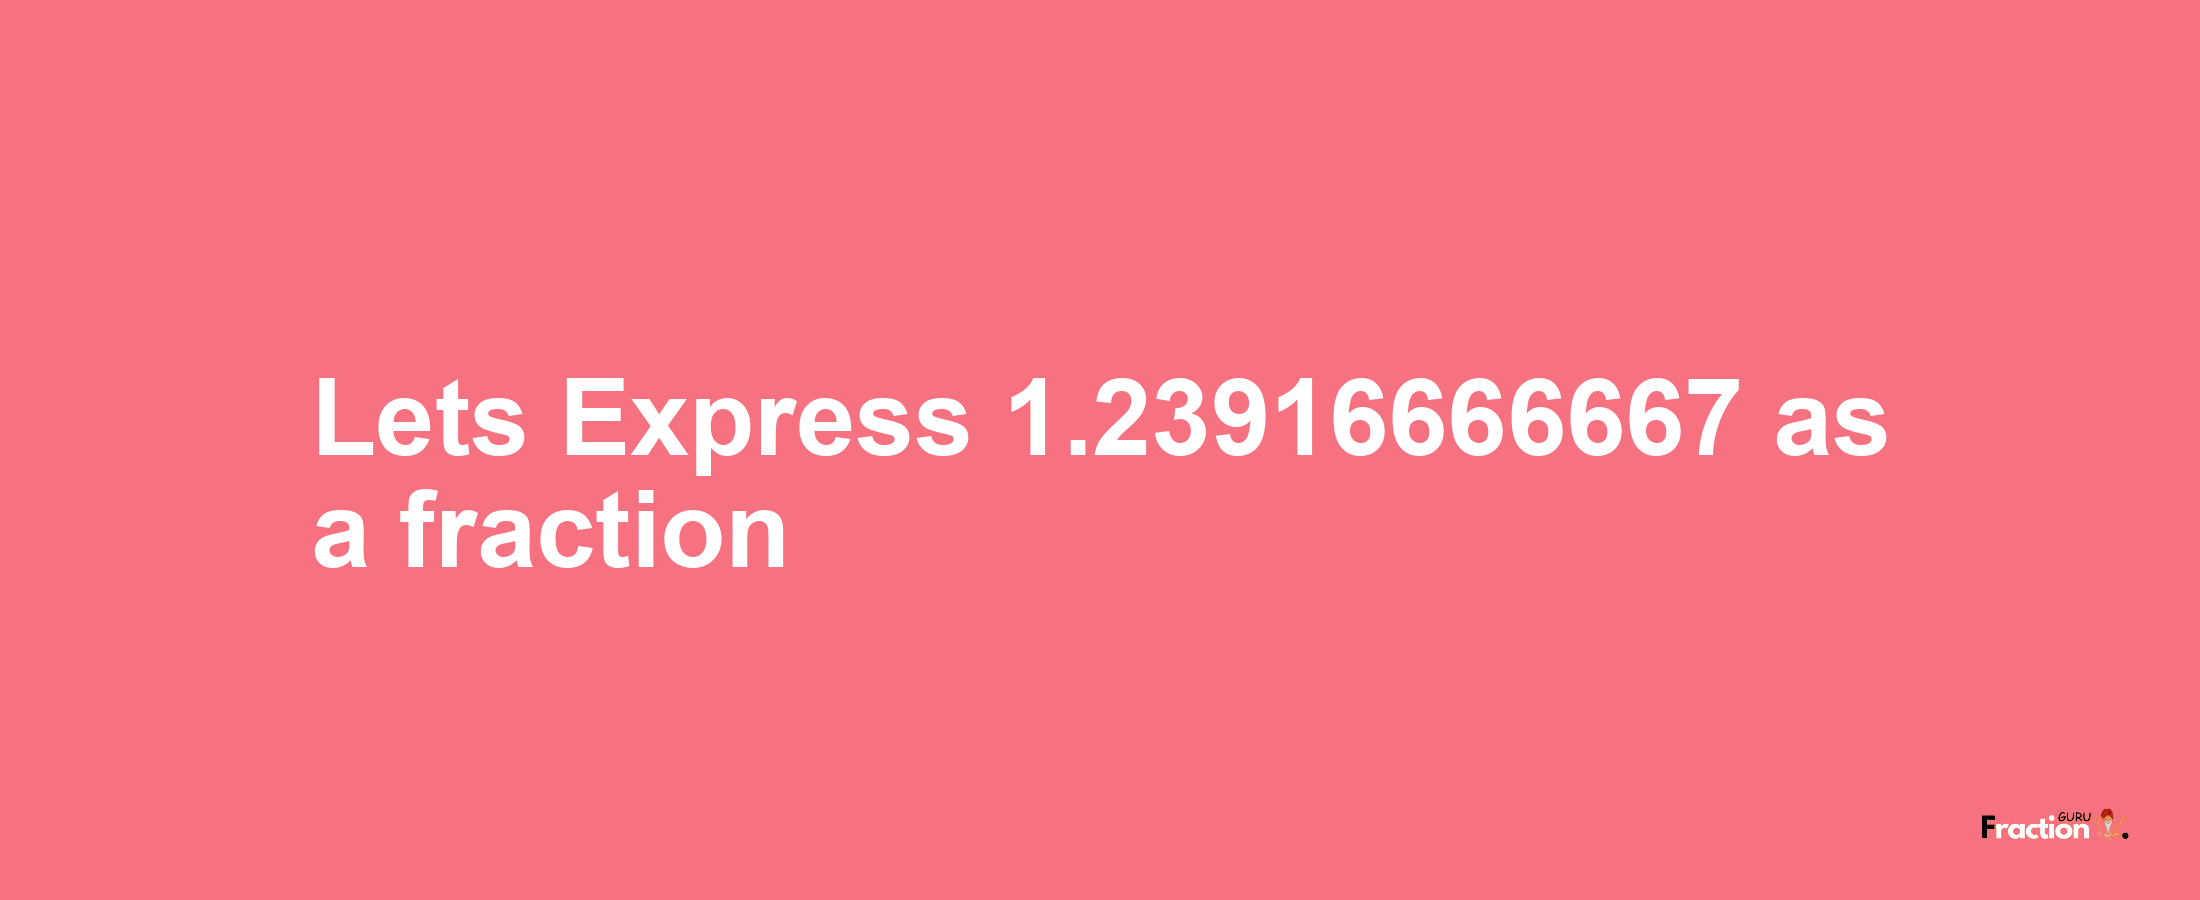 Lets Express 1.23916666667 as afraction